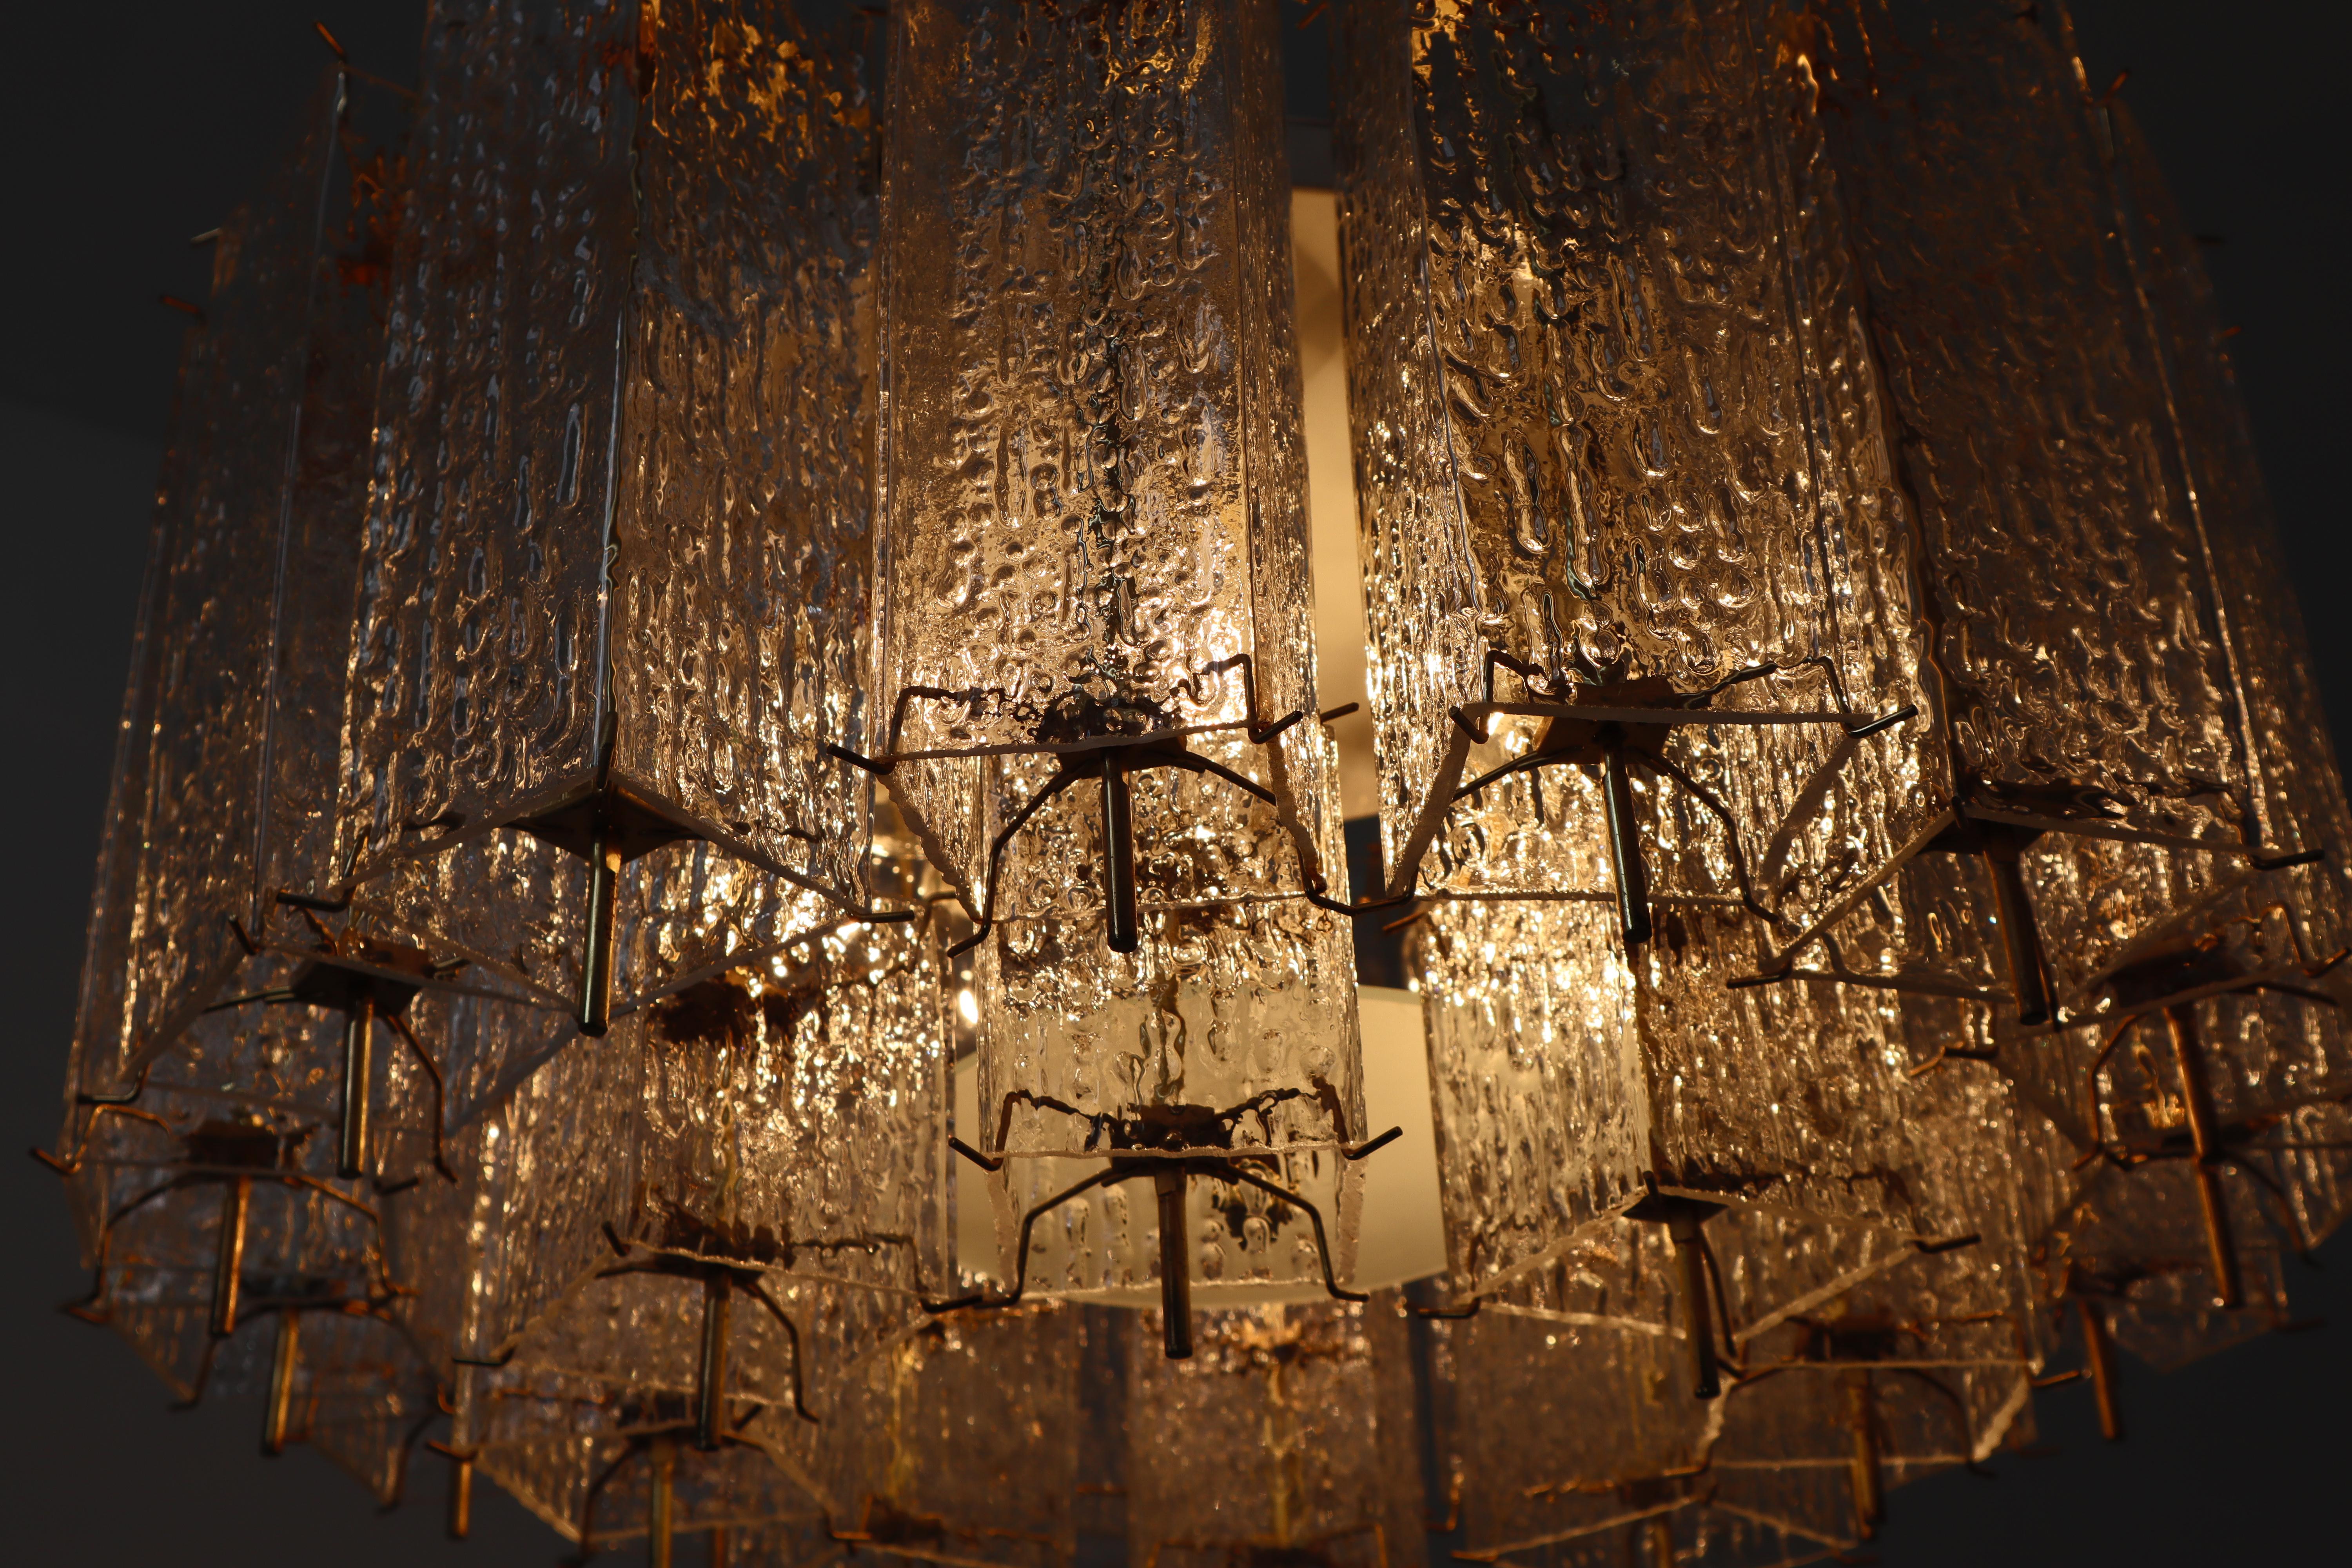 European Set of Two Large Midcentury Chandeliers with Ice Glass Tubes in Brass Fixture